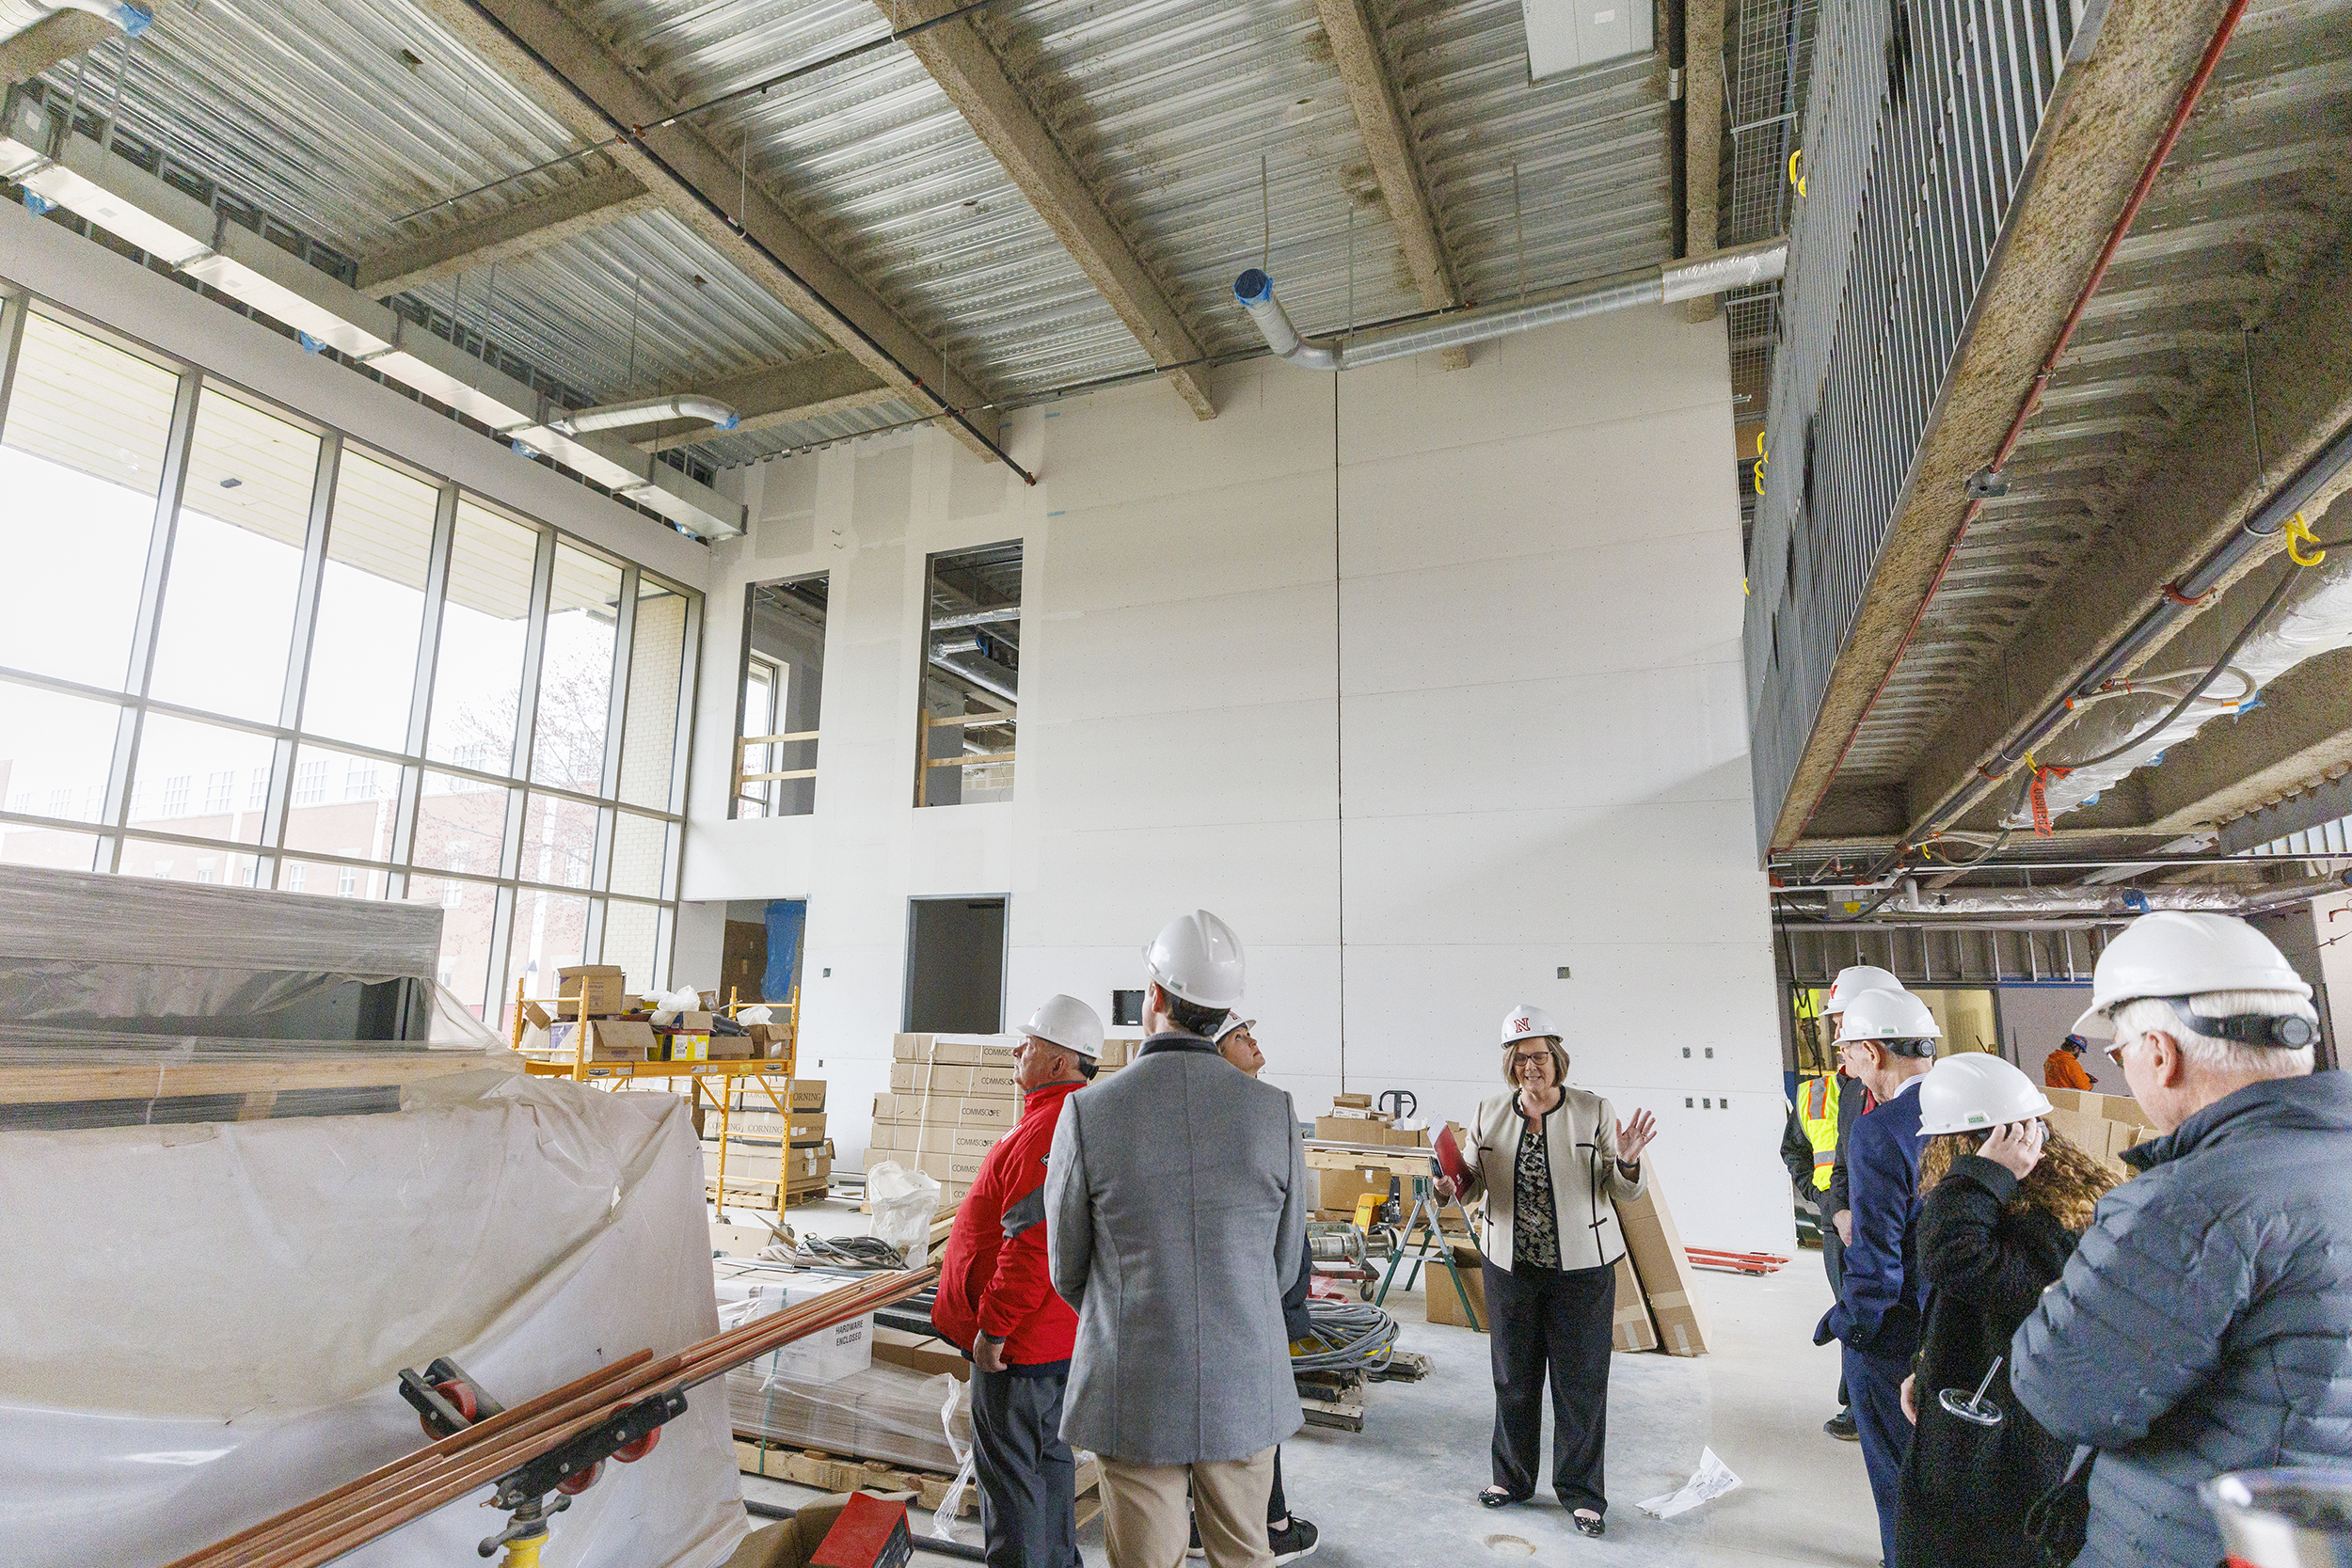 Sherri Jones, dean of education and human sciences, describes the open space called the “living room” under construction in Carolyn Pope Edwards Hall during a Board of Regents tour April 7.